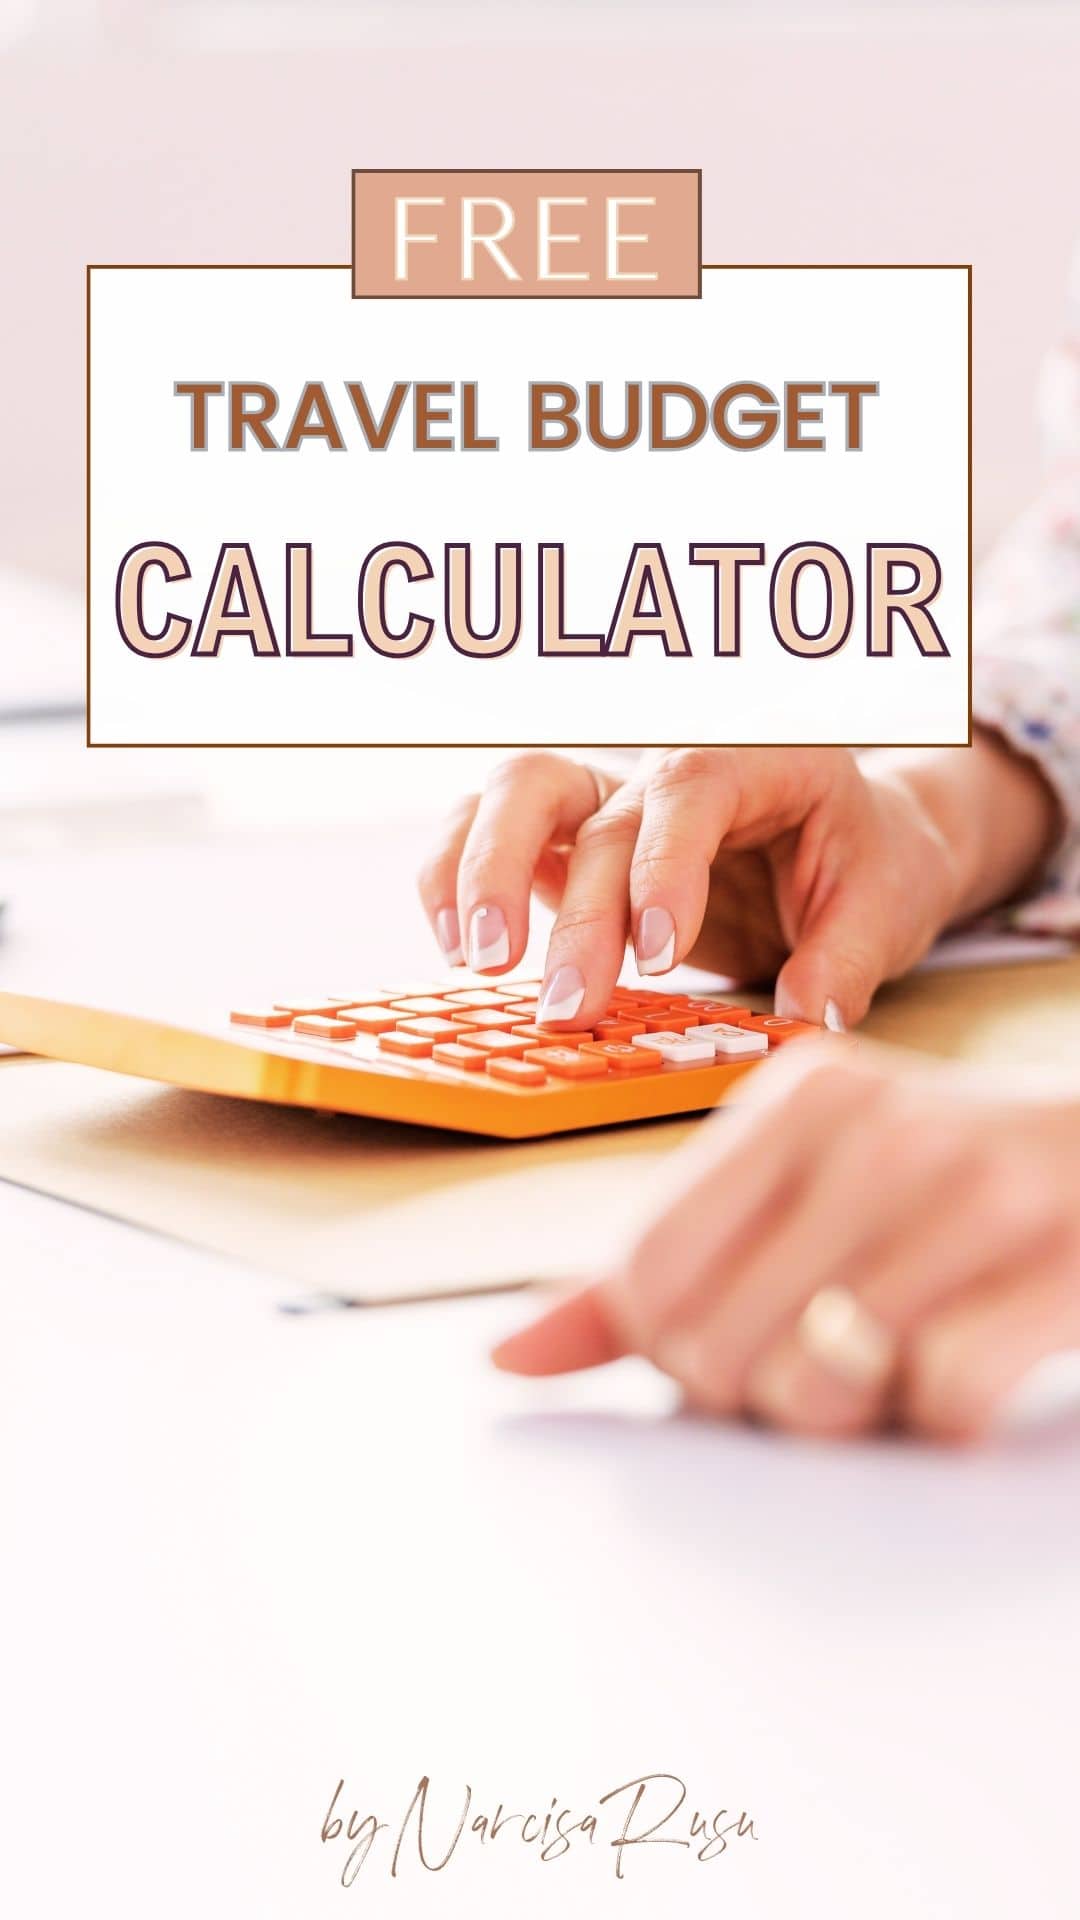 I am typing calculating my travel budget